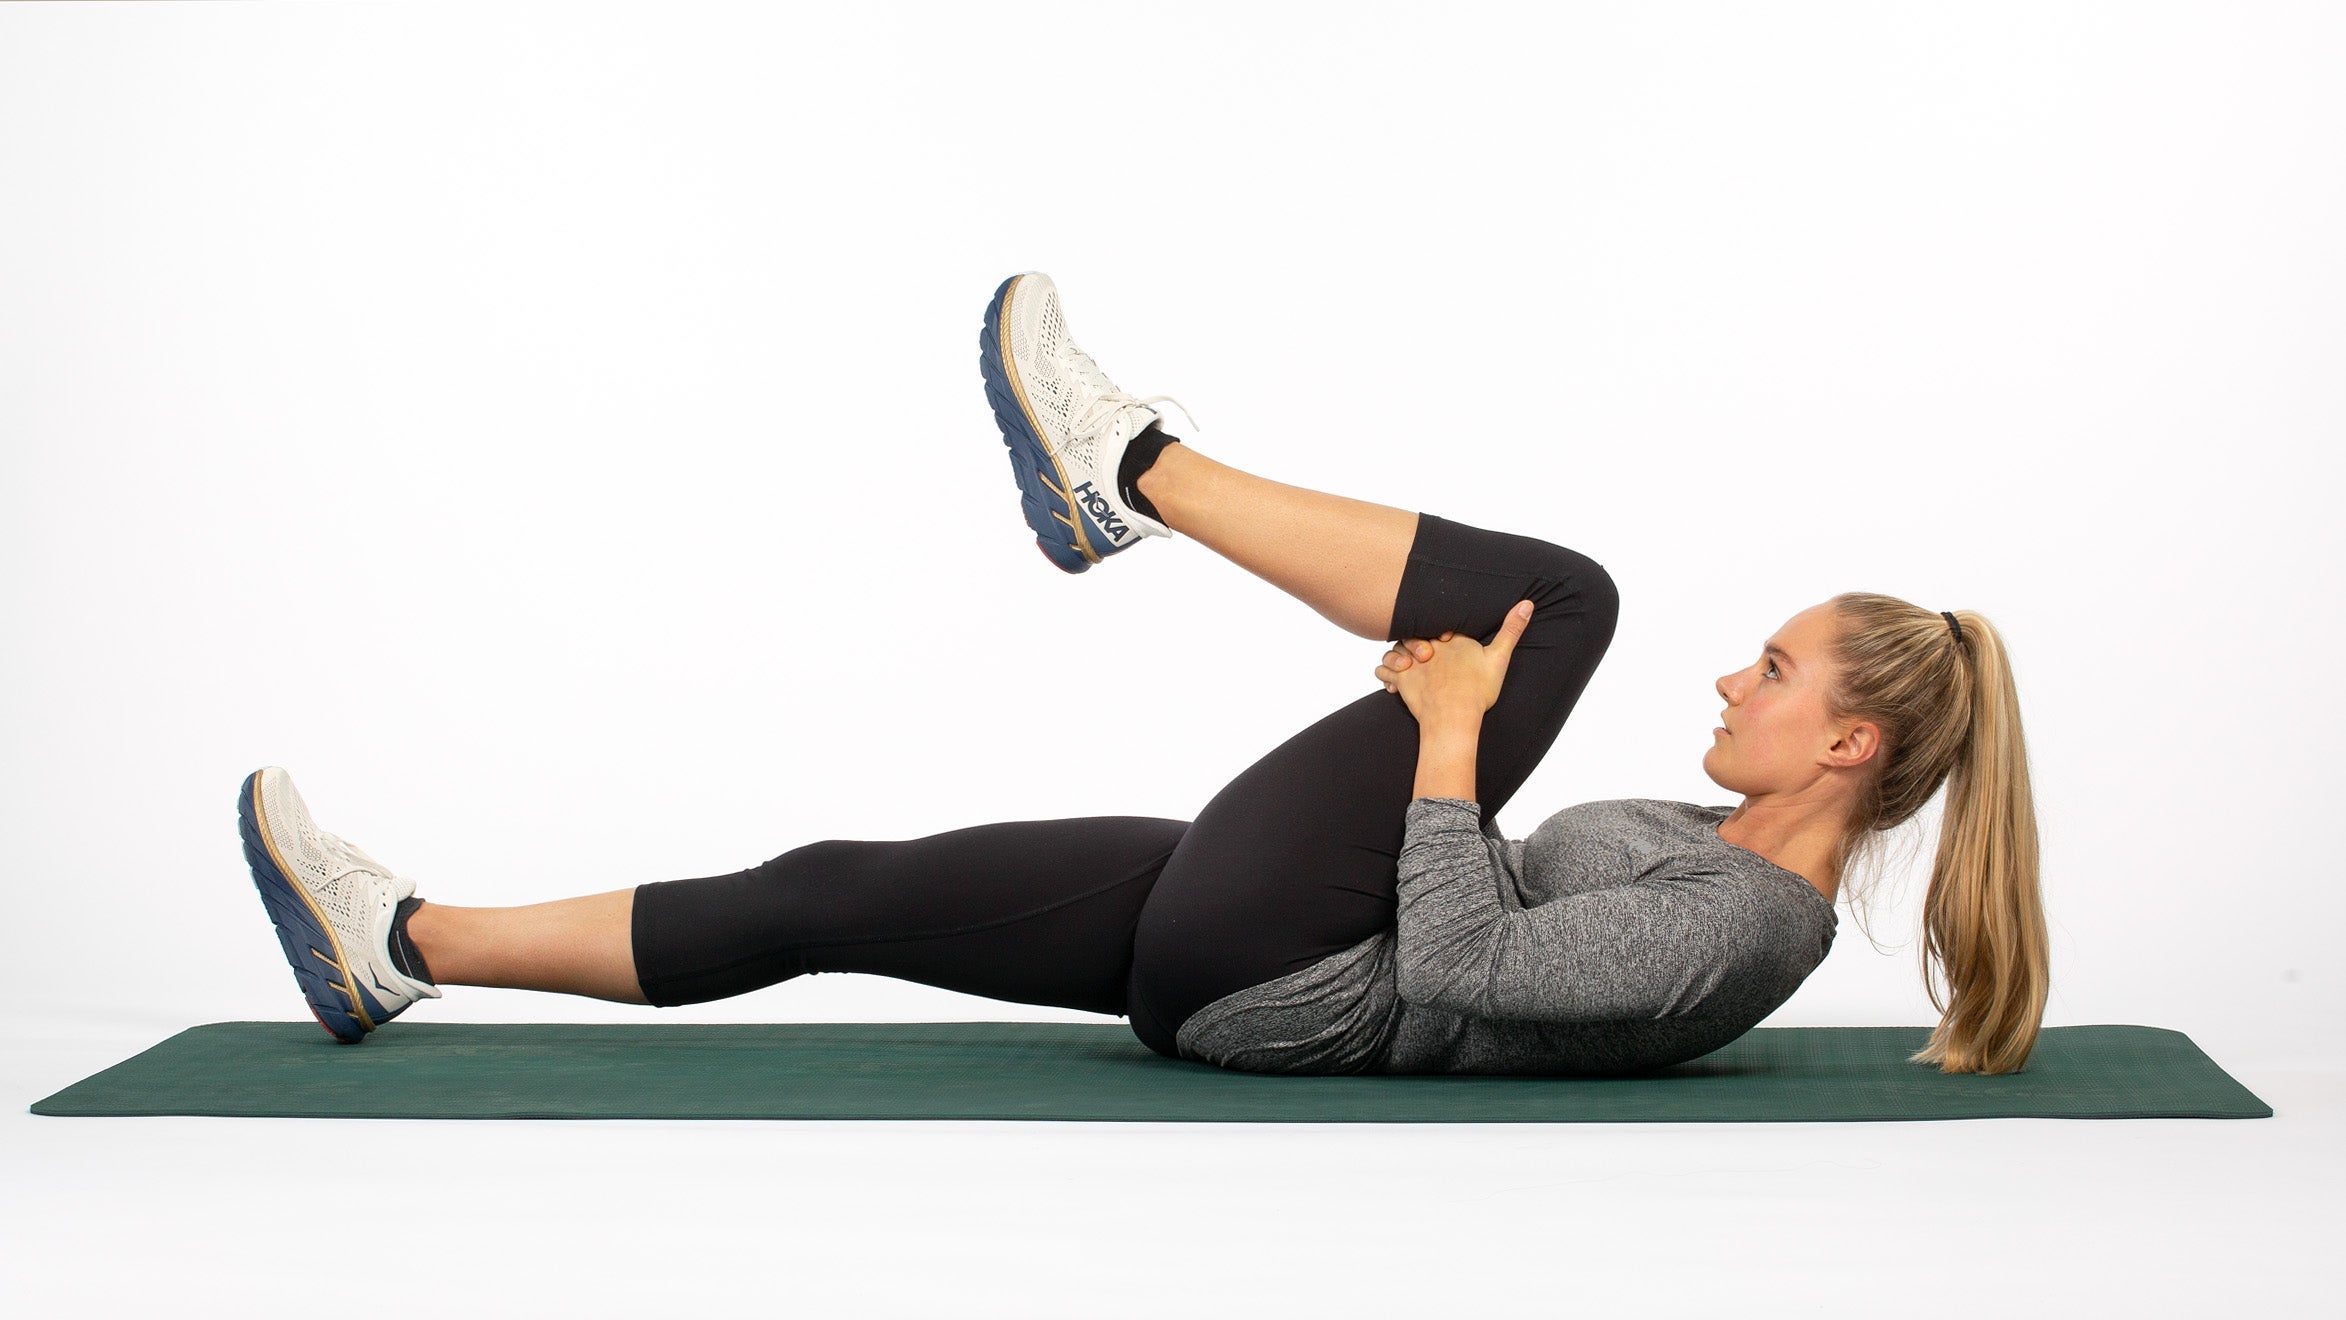 The 10 most effective stretches for runners